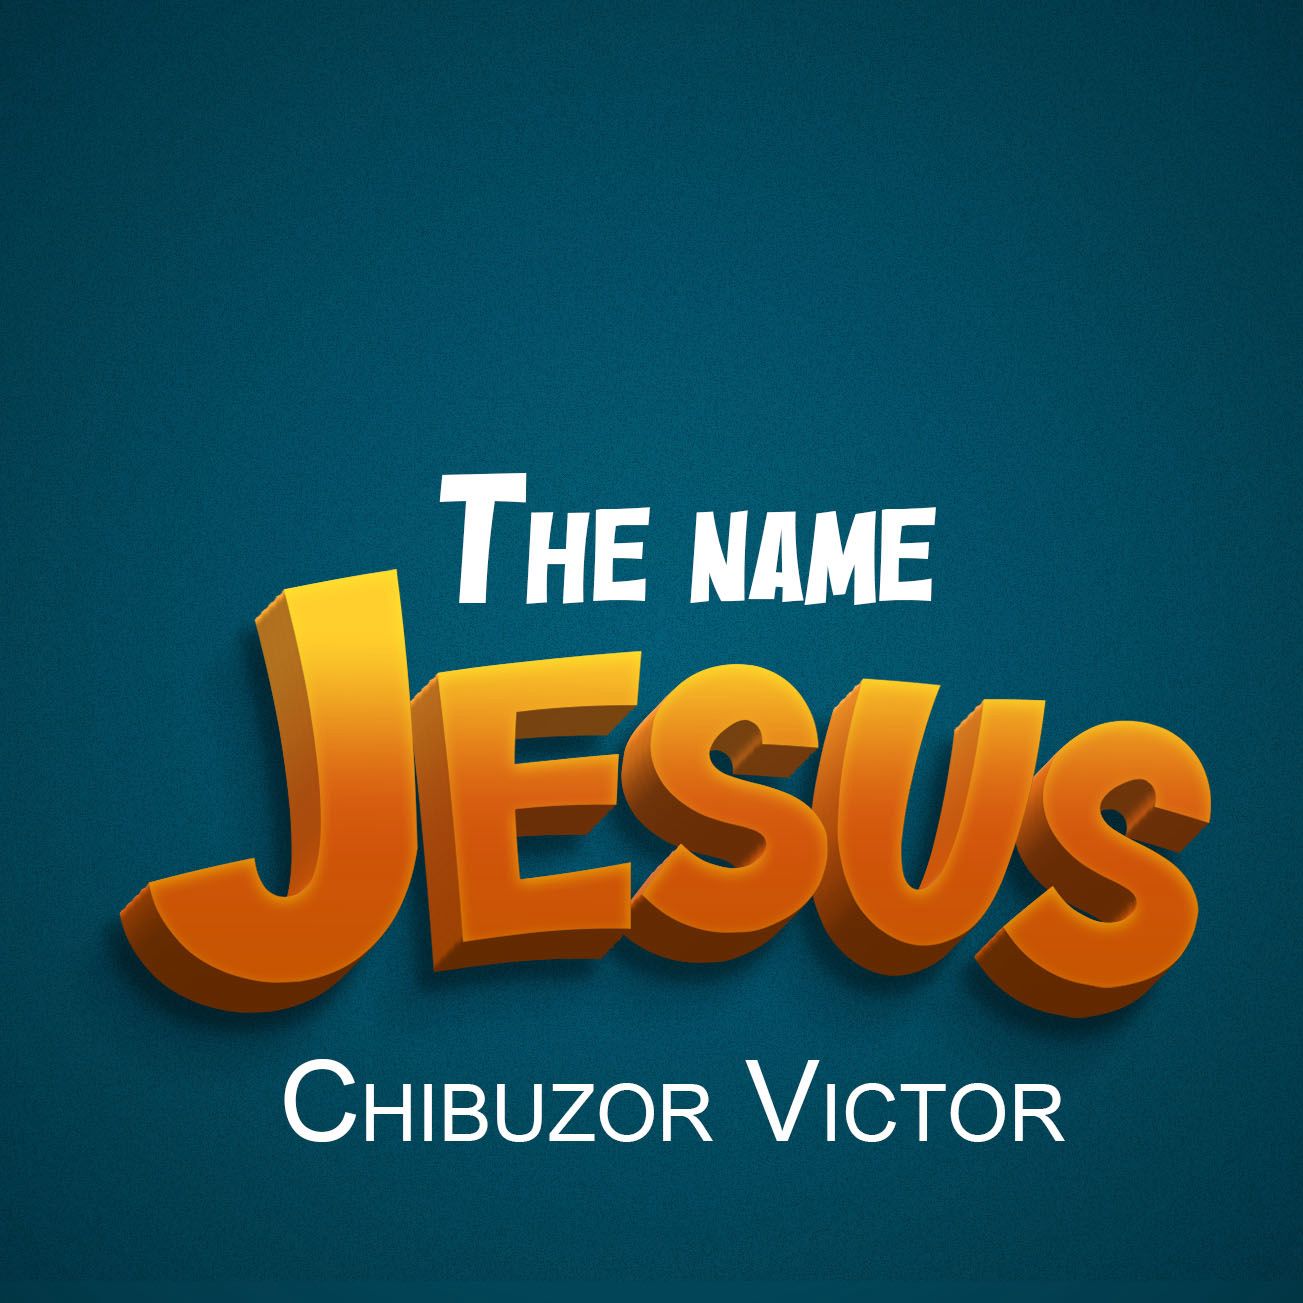 The Name Jesus by Chibuzor Victor